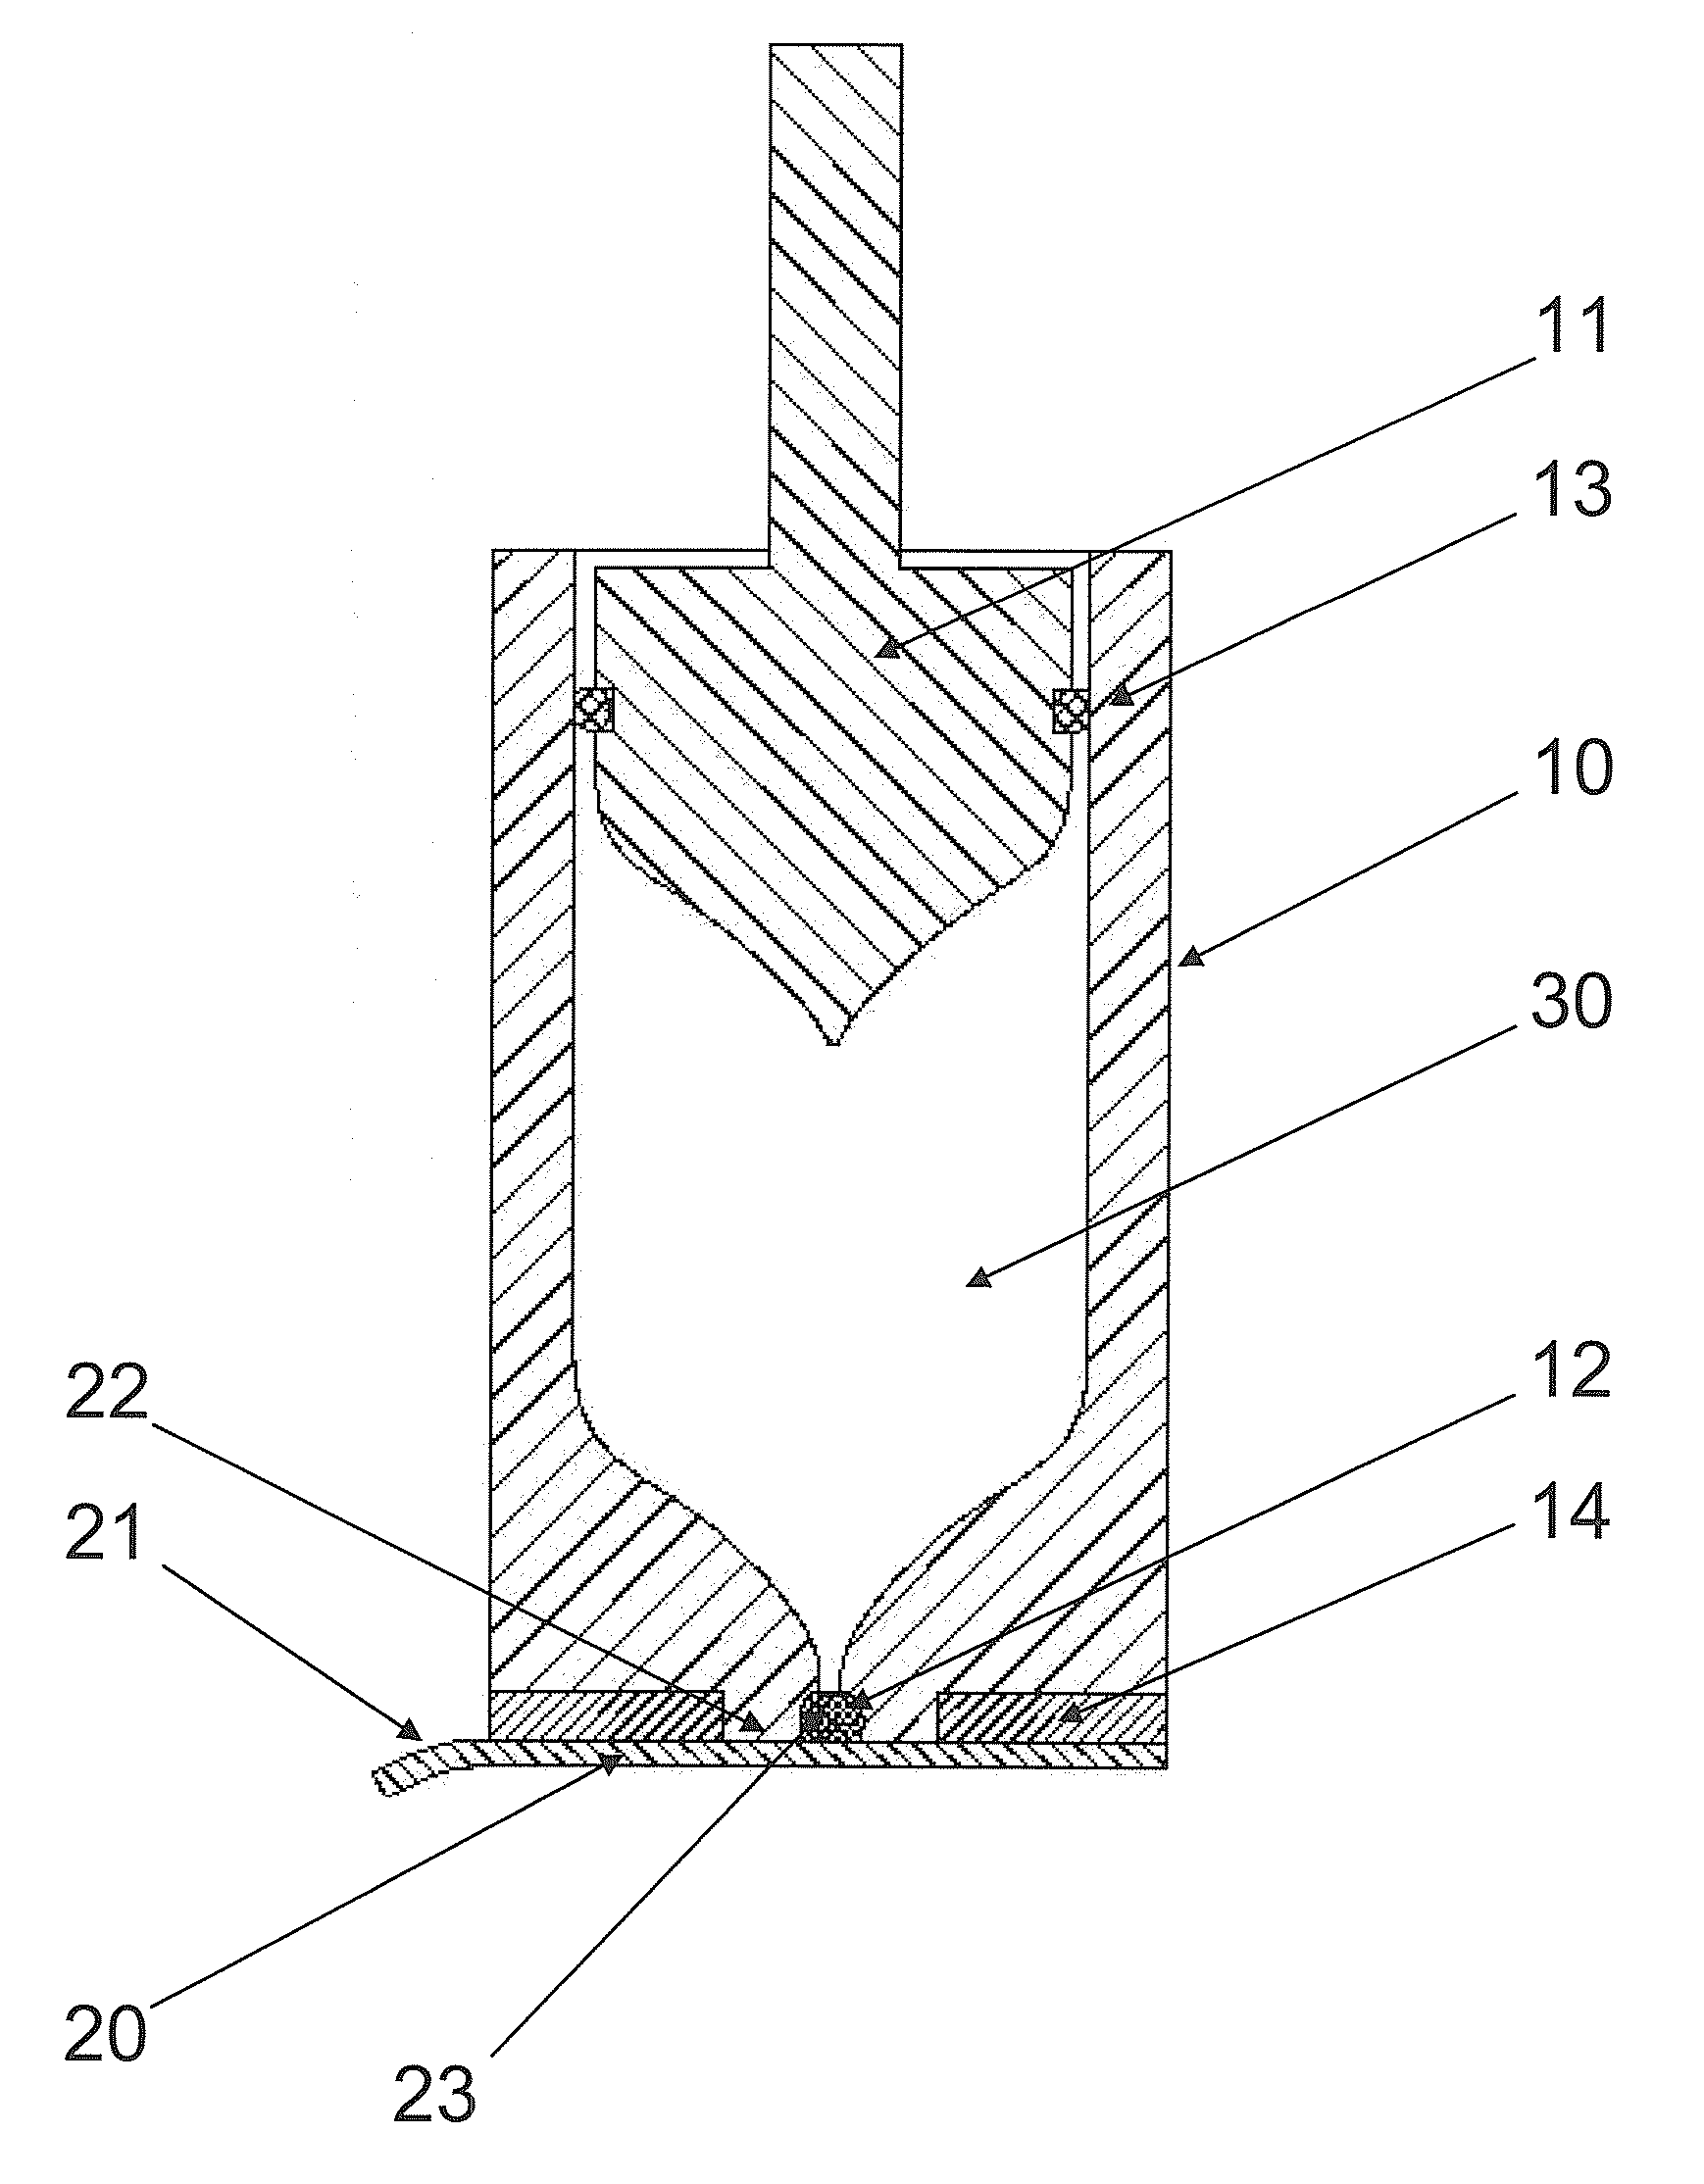 Seal for a Prefilled Medical Jet Injection Device